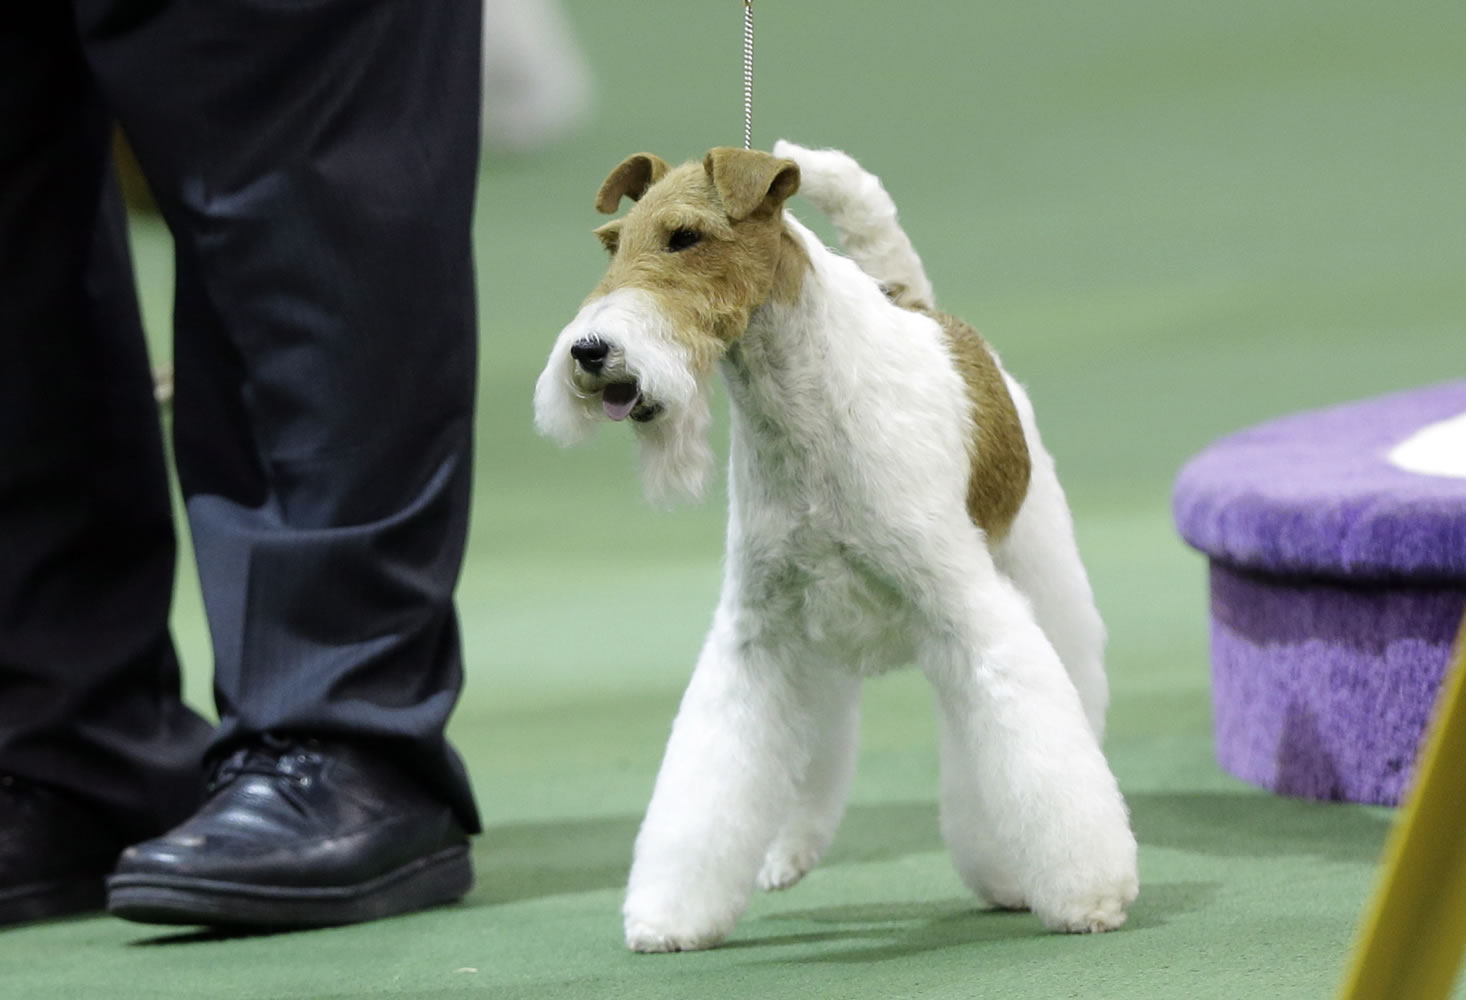 Sky, a wire fox terrier, wins the terrier group during the Westminster Kennel Club dog show, Tuesday, Feb. 11, 2014, in New York.